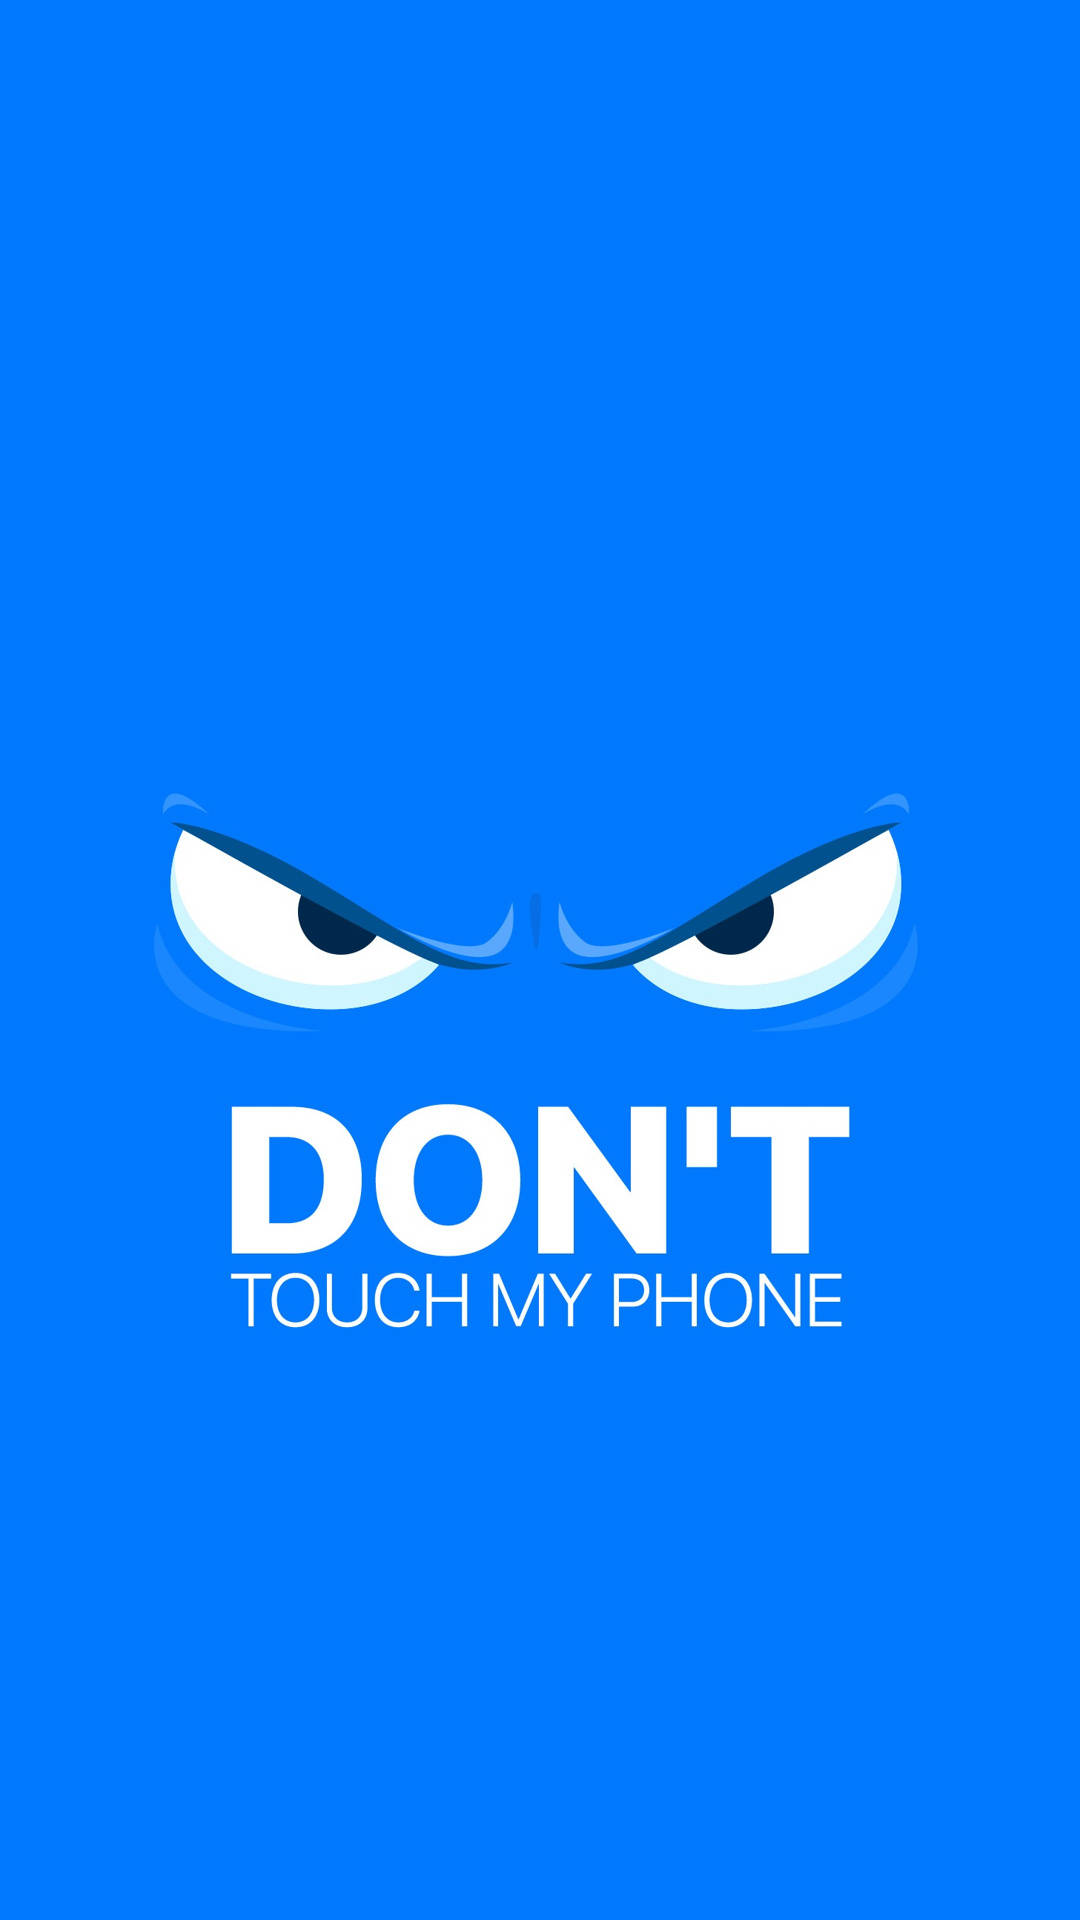 Free Dont Touch My Phone Wallpaper Downloads, [200+] Dont Touch My Phone  Wallpapers For Free | Wallpapers.Com